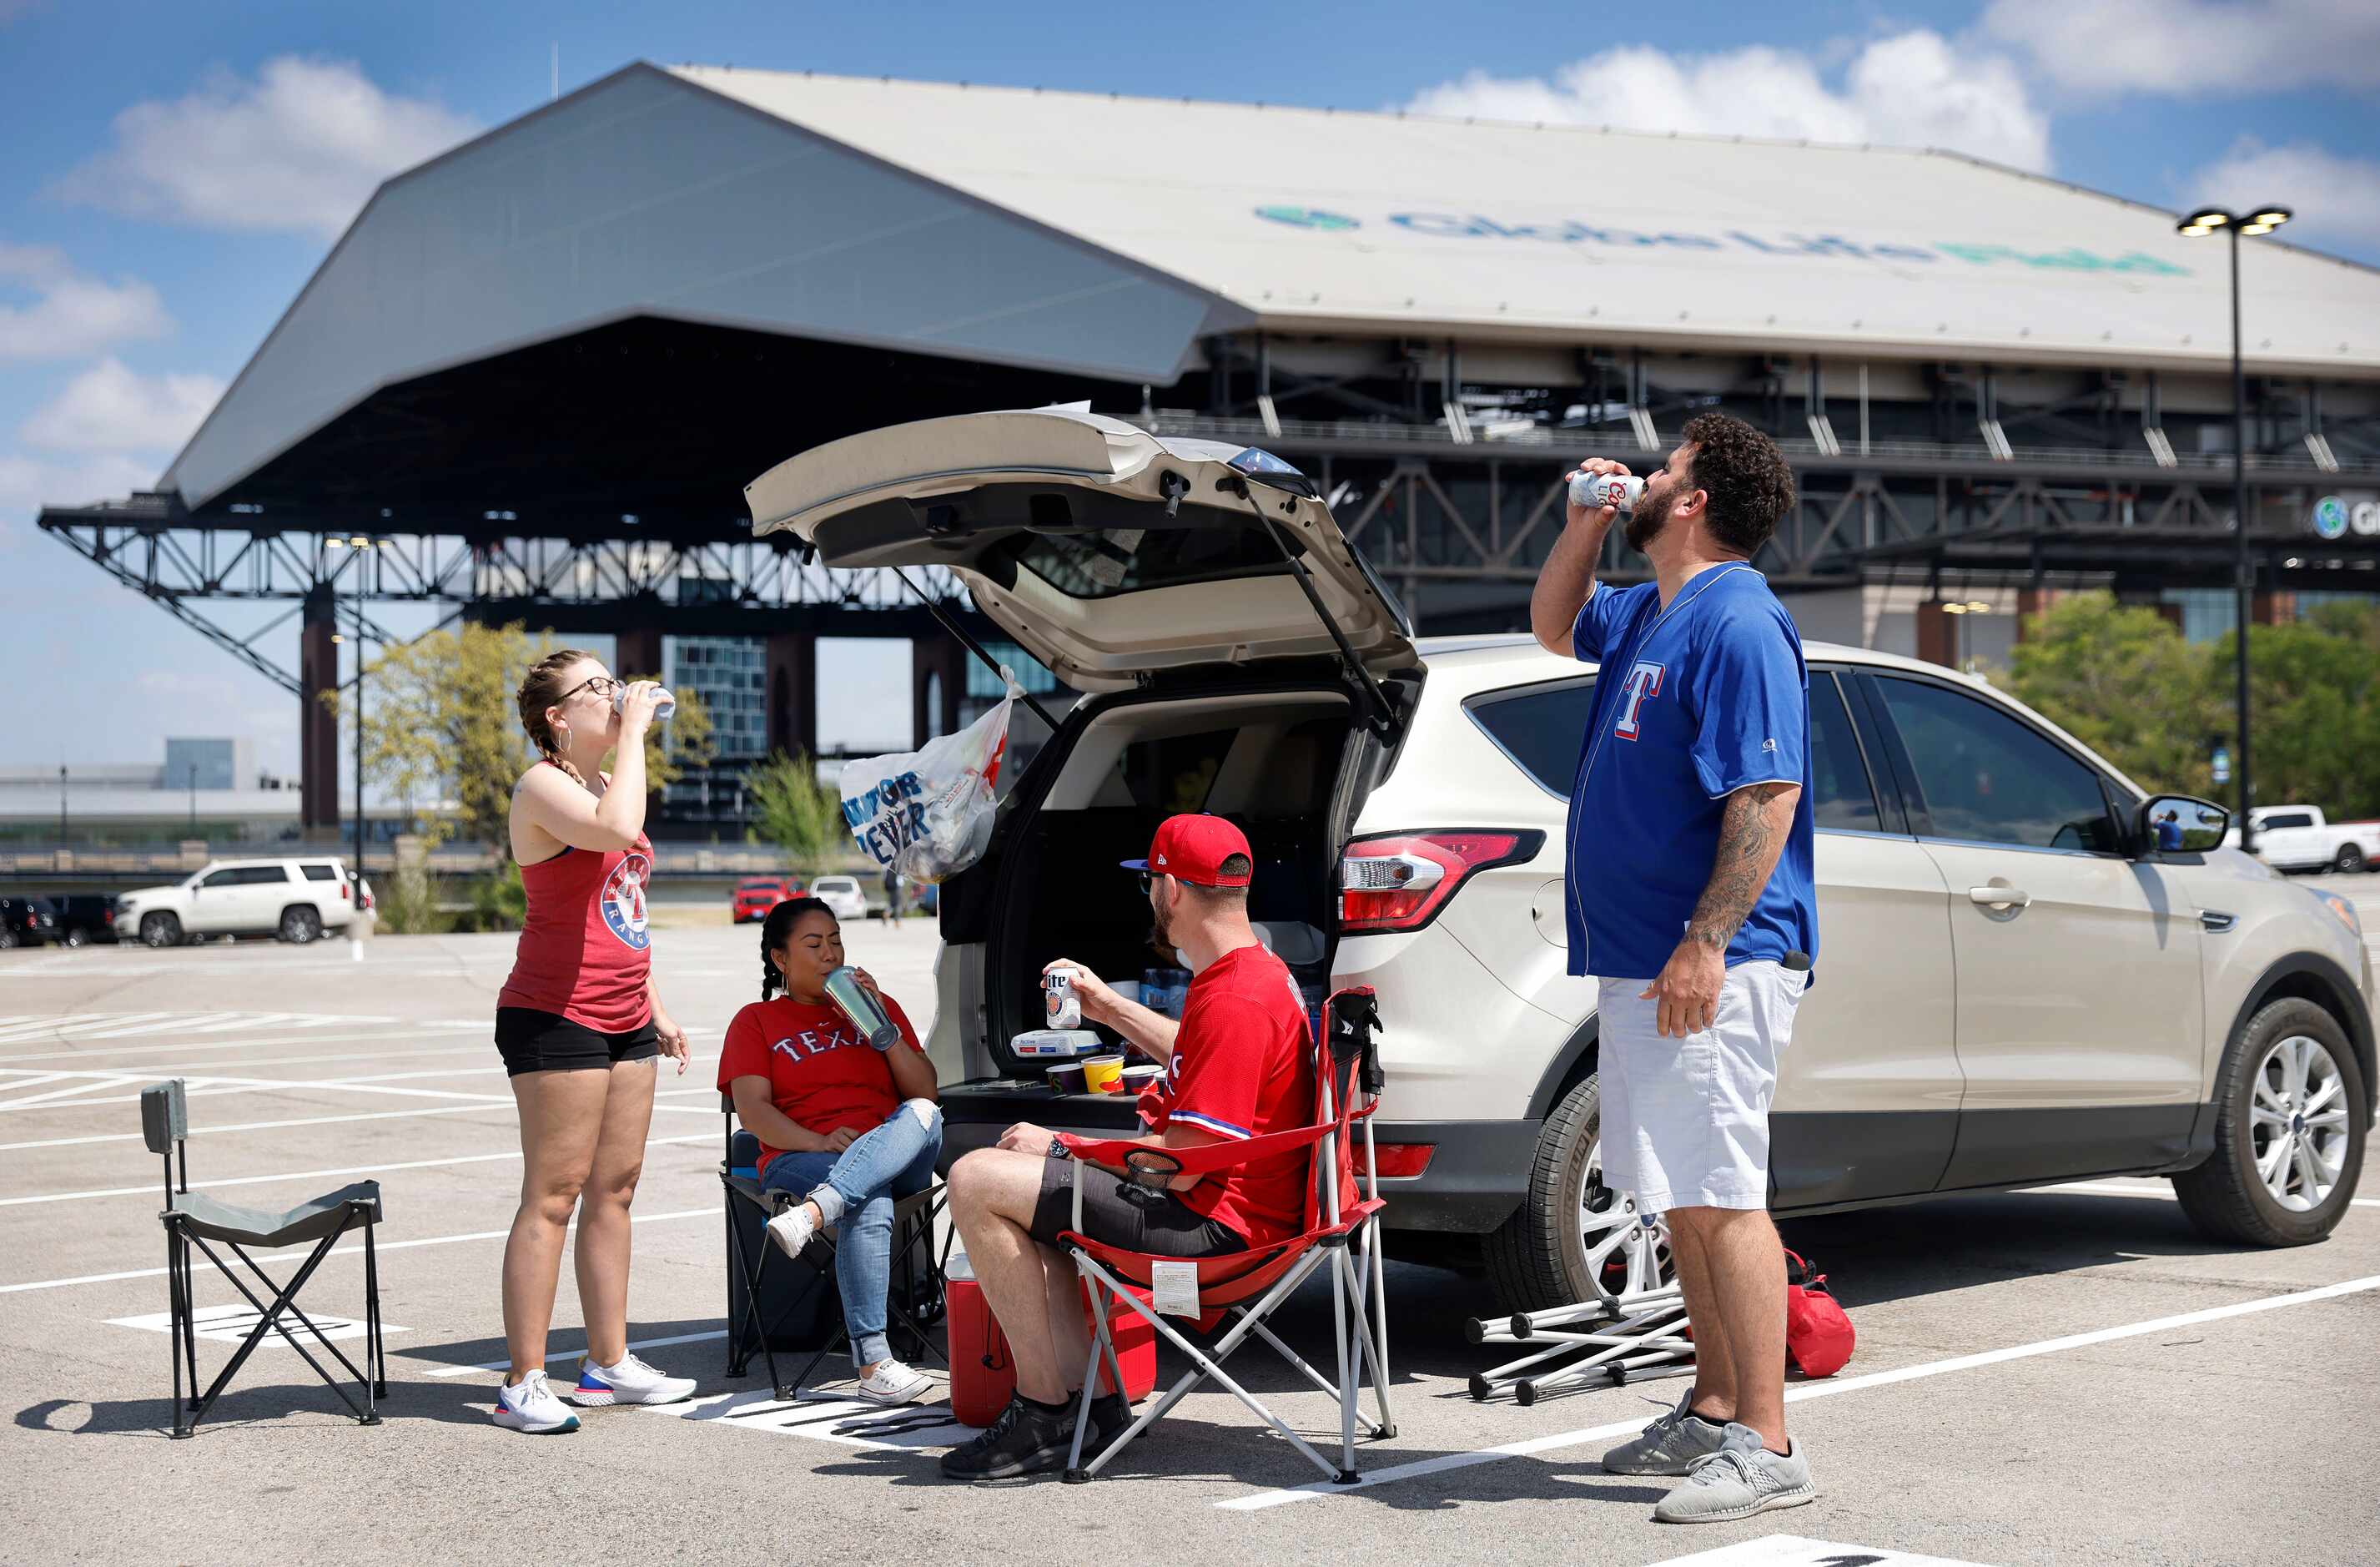 Texas Rangers fans (from left) Tiffany Phillips, Scout Chitavong, Jaime Shannon, and Cameron...